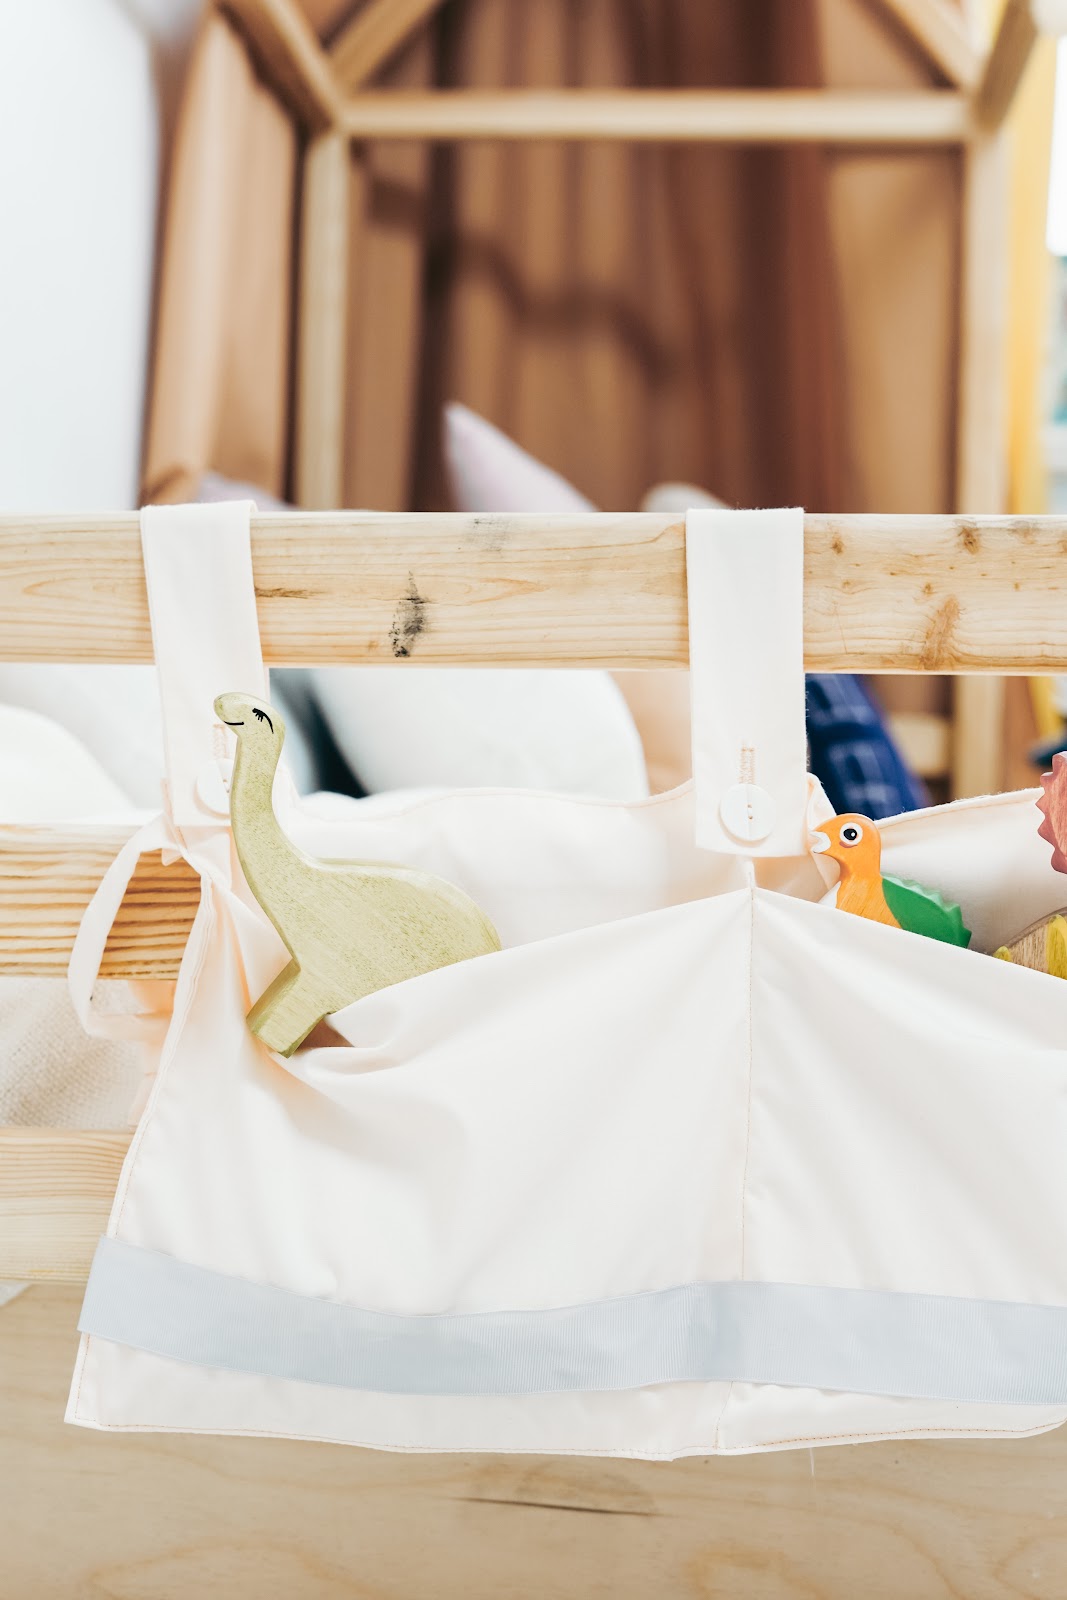 Steps To Start A Baby Equipment Rental Business